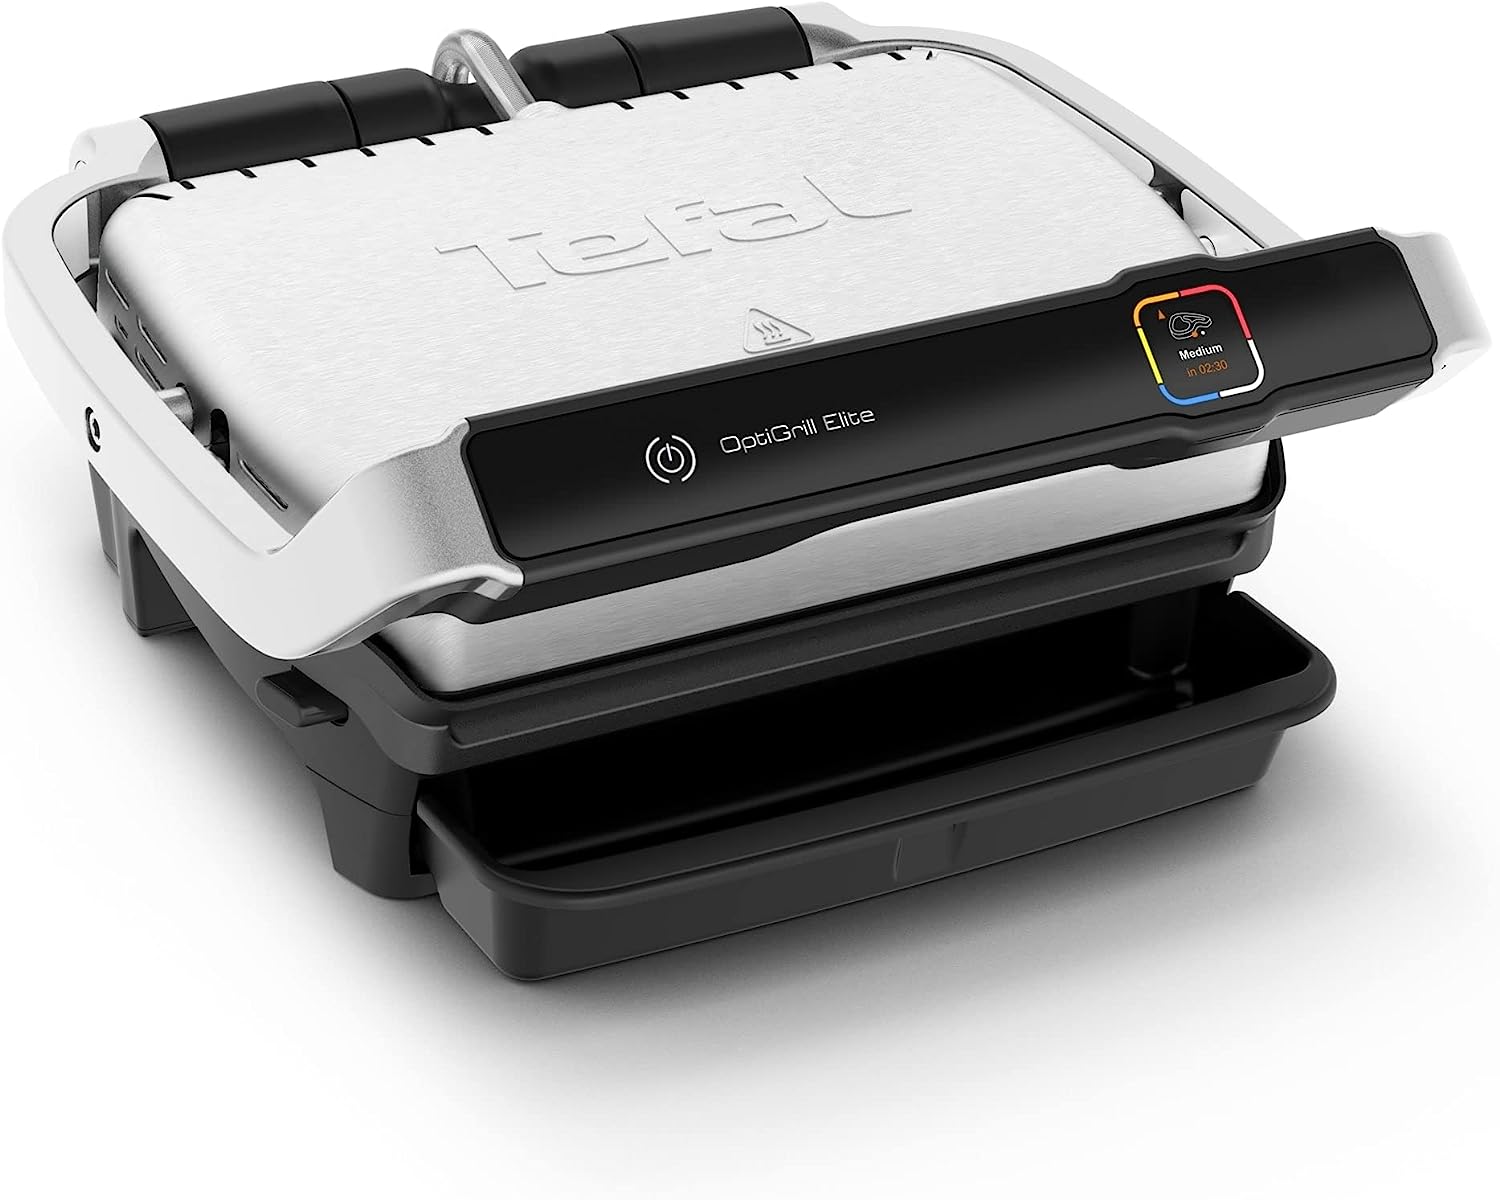 Tefal GC750D Optigrill Elite Contact Grill Includes Recipe Book 12 Intuitive programs Intuitive Sensor Grill Boost Function Dishwasher Safe Plates Stainless Steel / Black